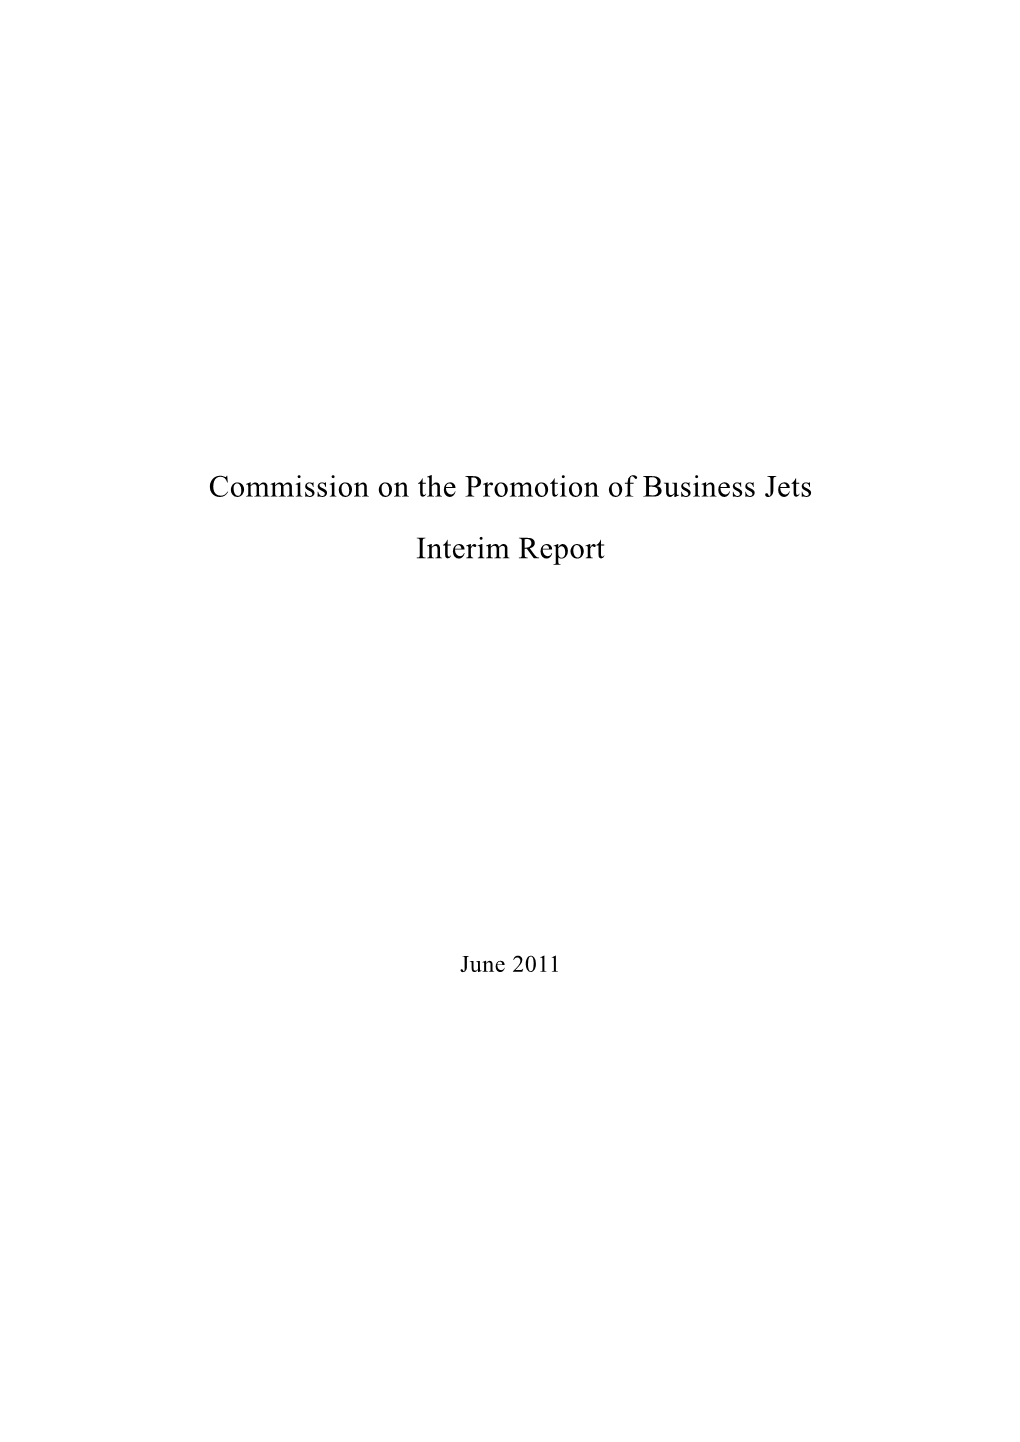 Commission on the Promotion of Business Jets Interim Report